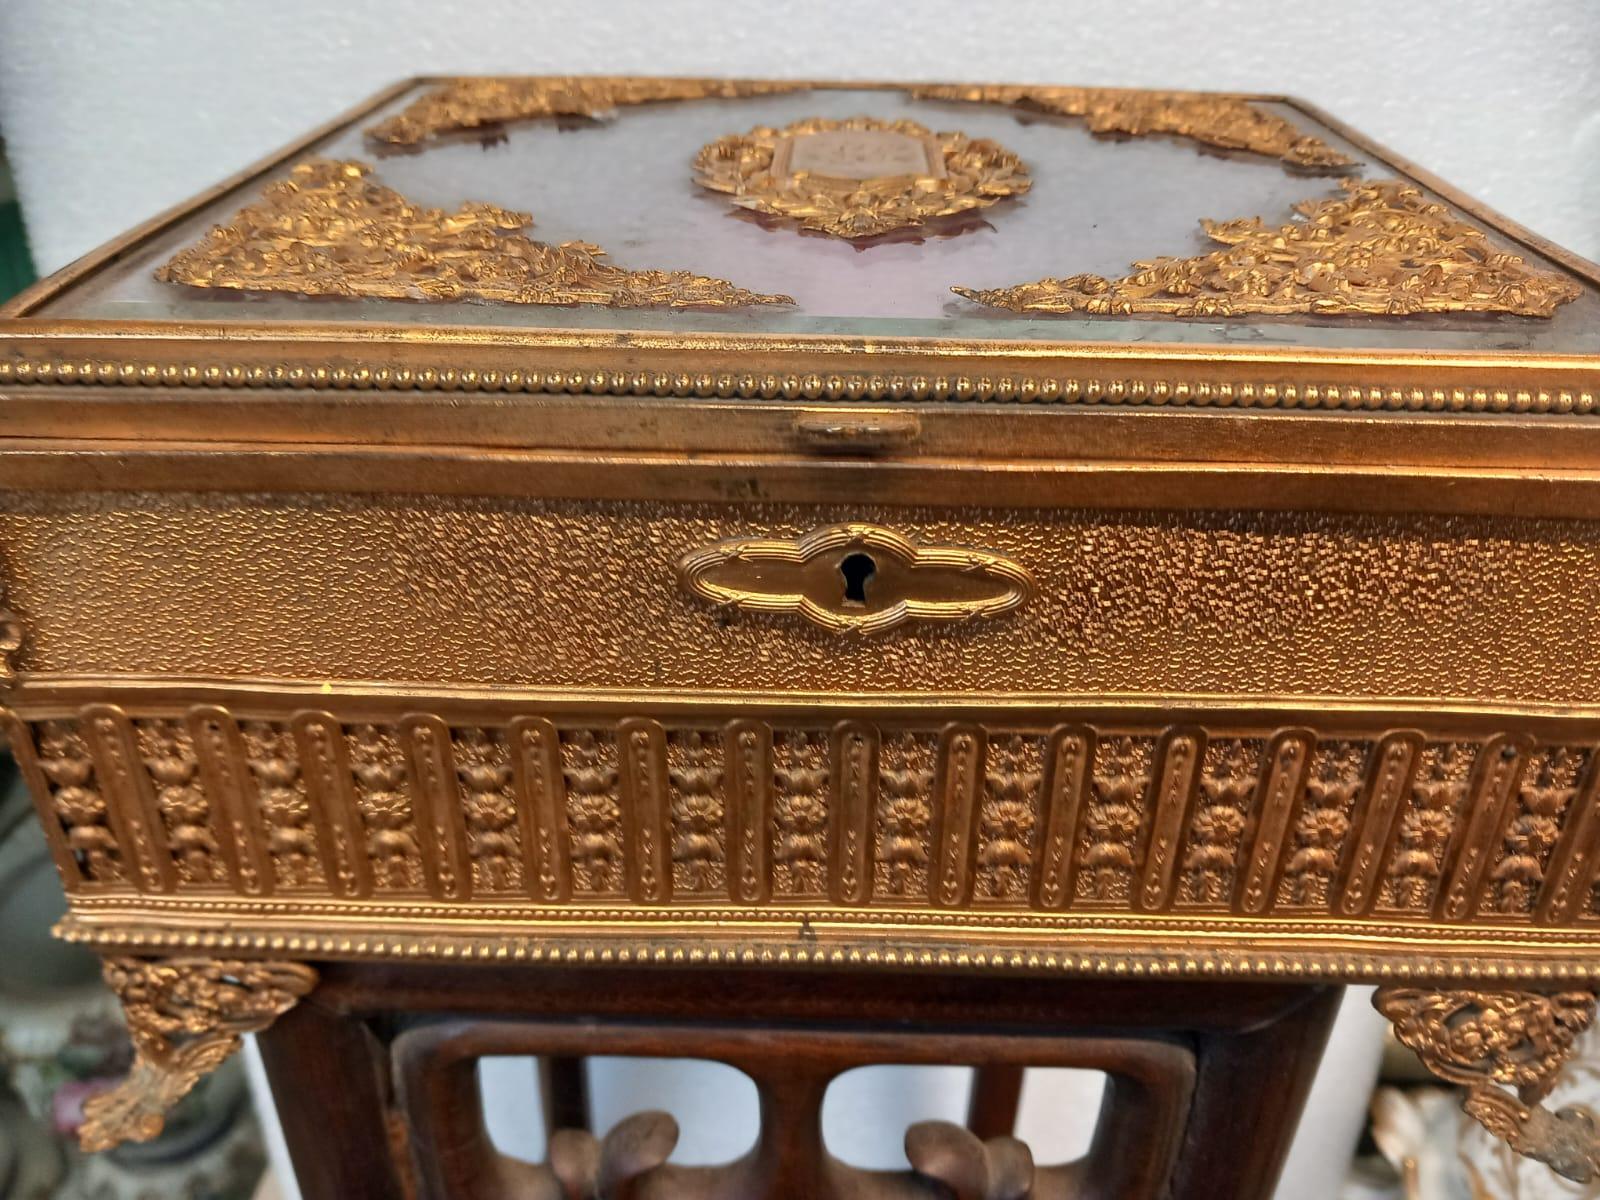 Palais Royal gilt bronze and mother of pearl jewellery casket or trinket box For Sale 7